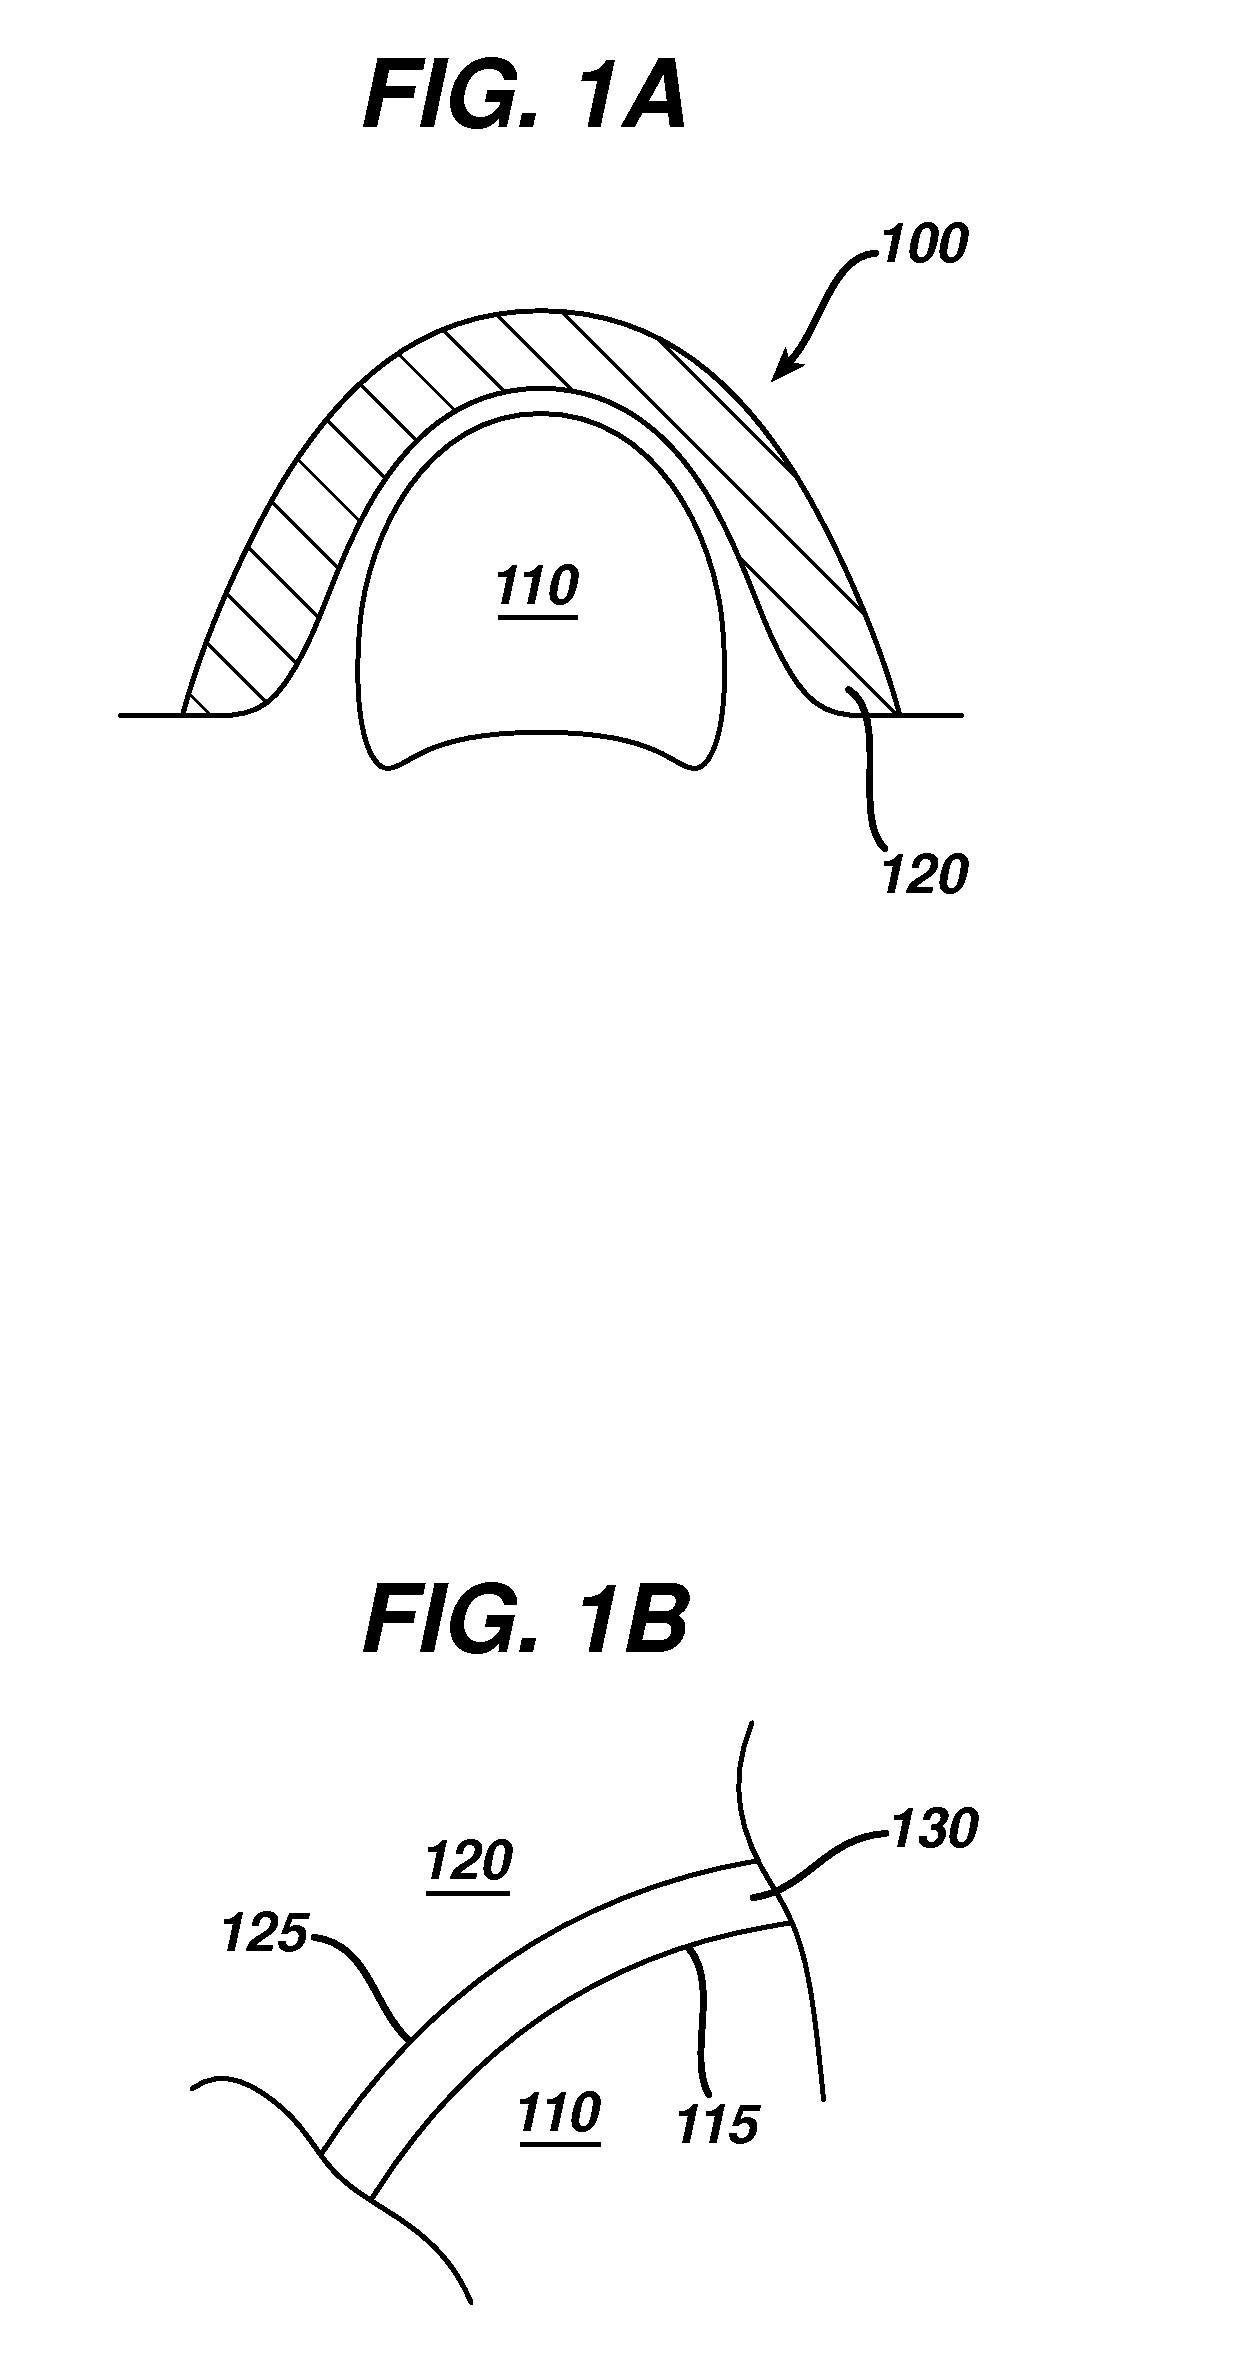 Implant surfaces and treatments for wear reduction